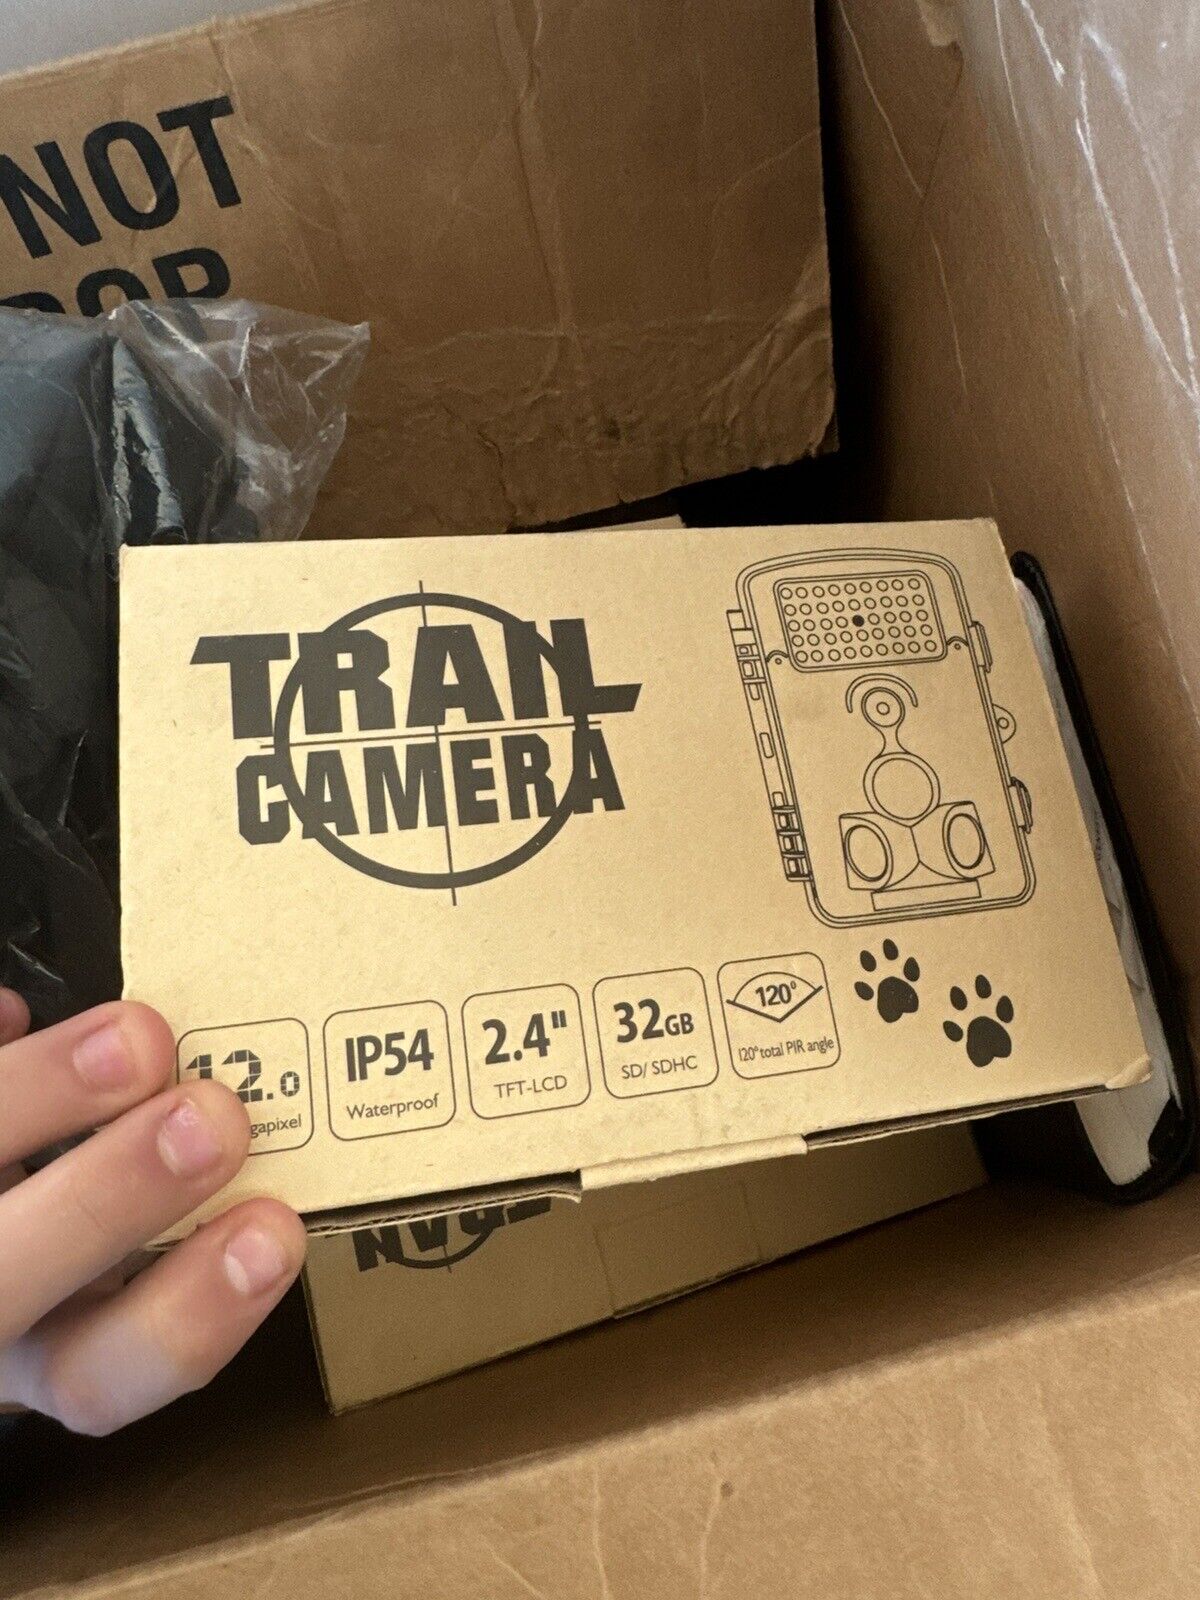 Trail Camera for hunting and watching animals at night